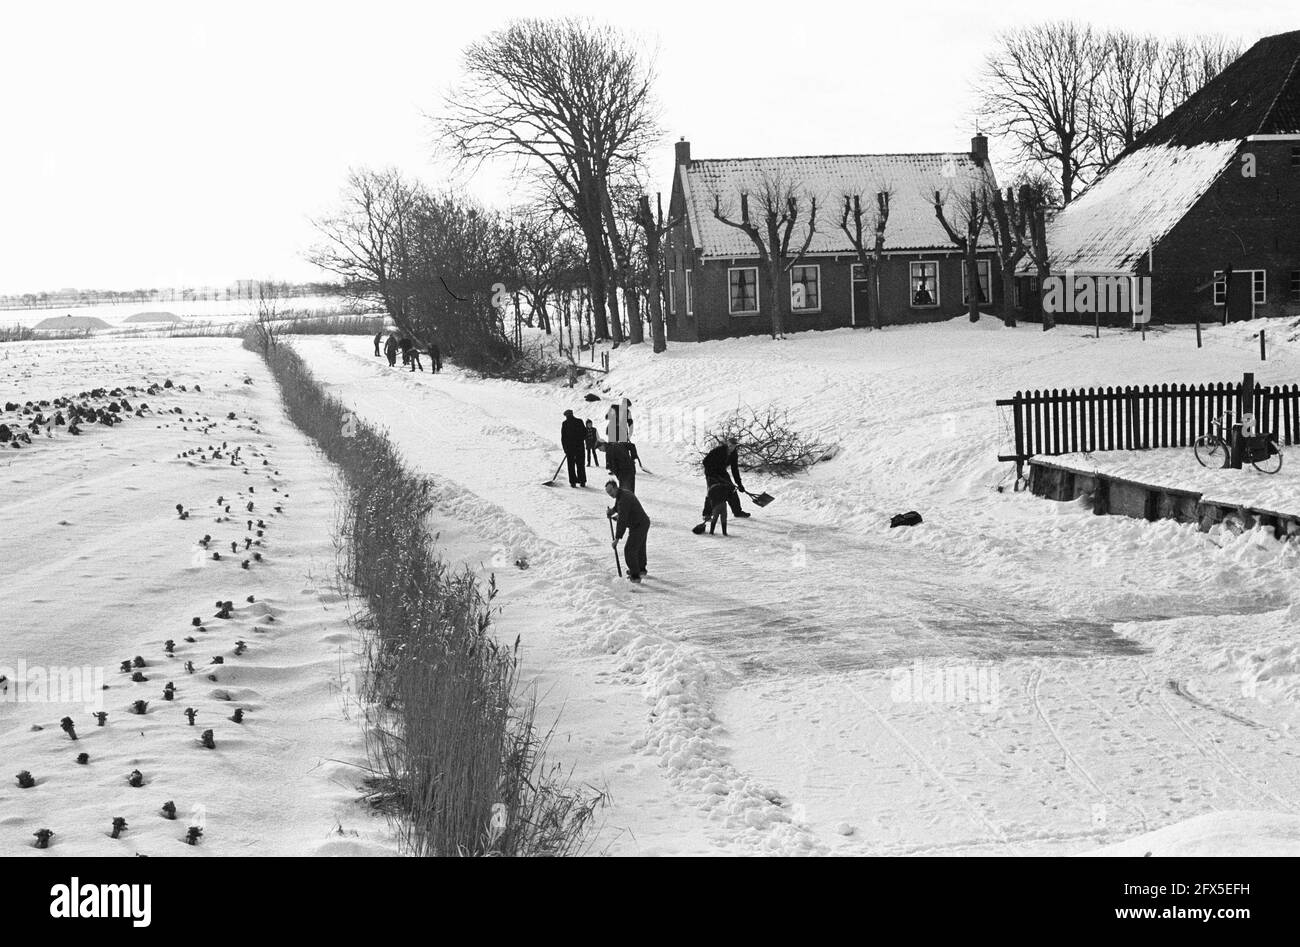 Friesland making preparations for the Elfstedentocht, near the village of Wier they clear the Blikvaart of snow, 14 January 1963, ice, snow, winters, The Netherlands, 20th century press agency photo, news to remember, documentary, historic photography 1945-1990, visual stories, human history of the Twentieth Century, capturing moments in time Stock Photo